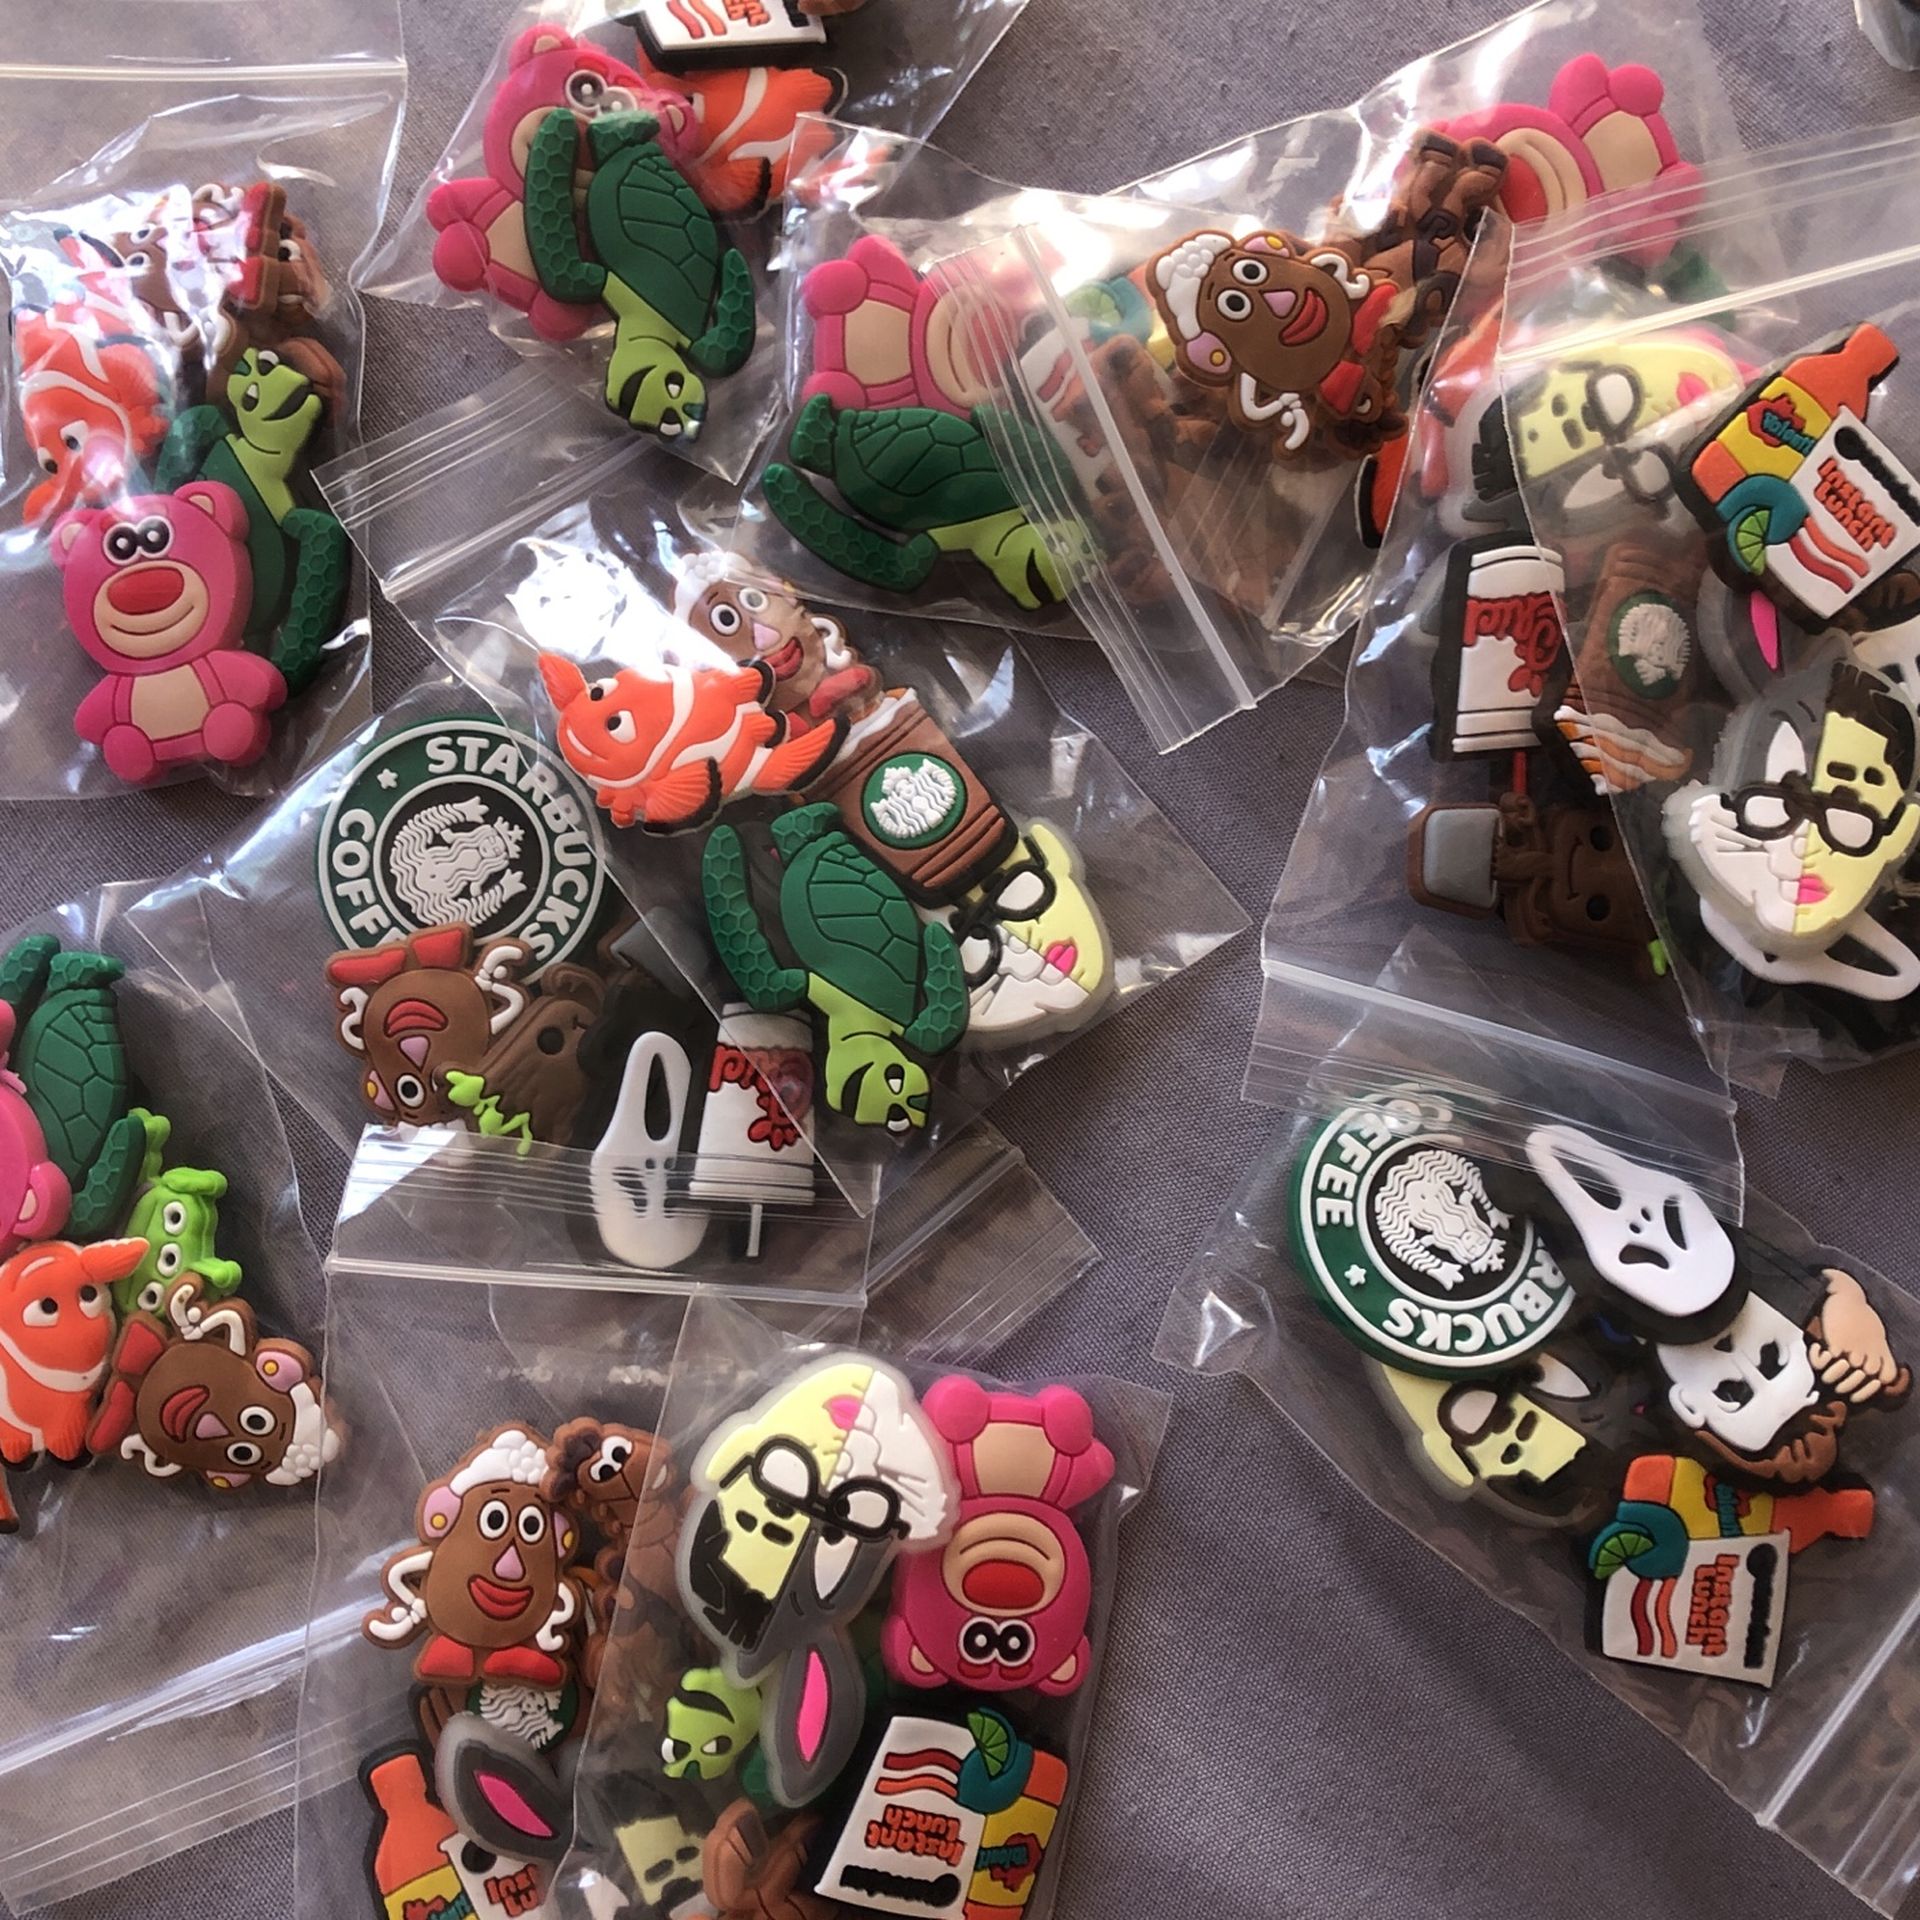 5 Piece Designer Croc Charms for Sale in Los Angeles, CA - OfferUp